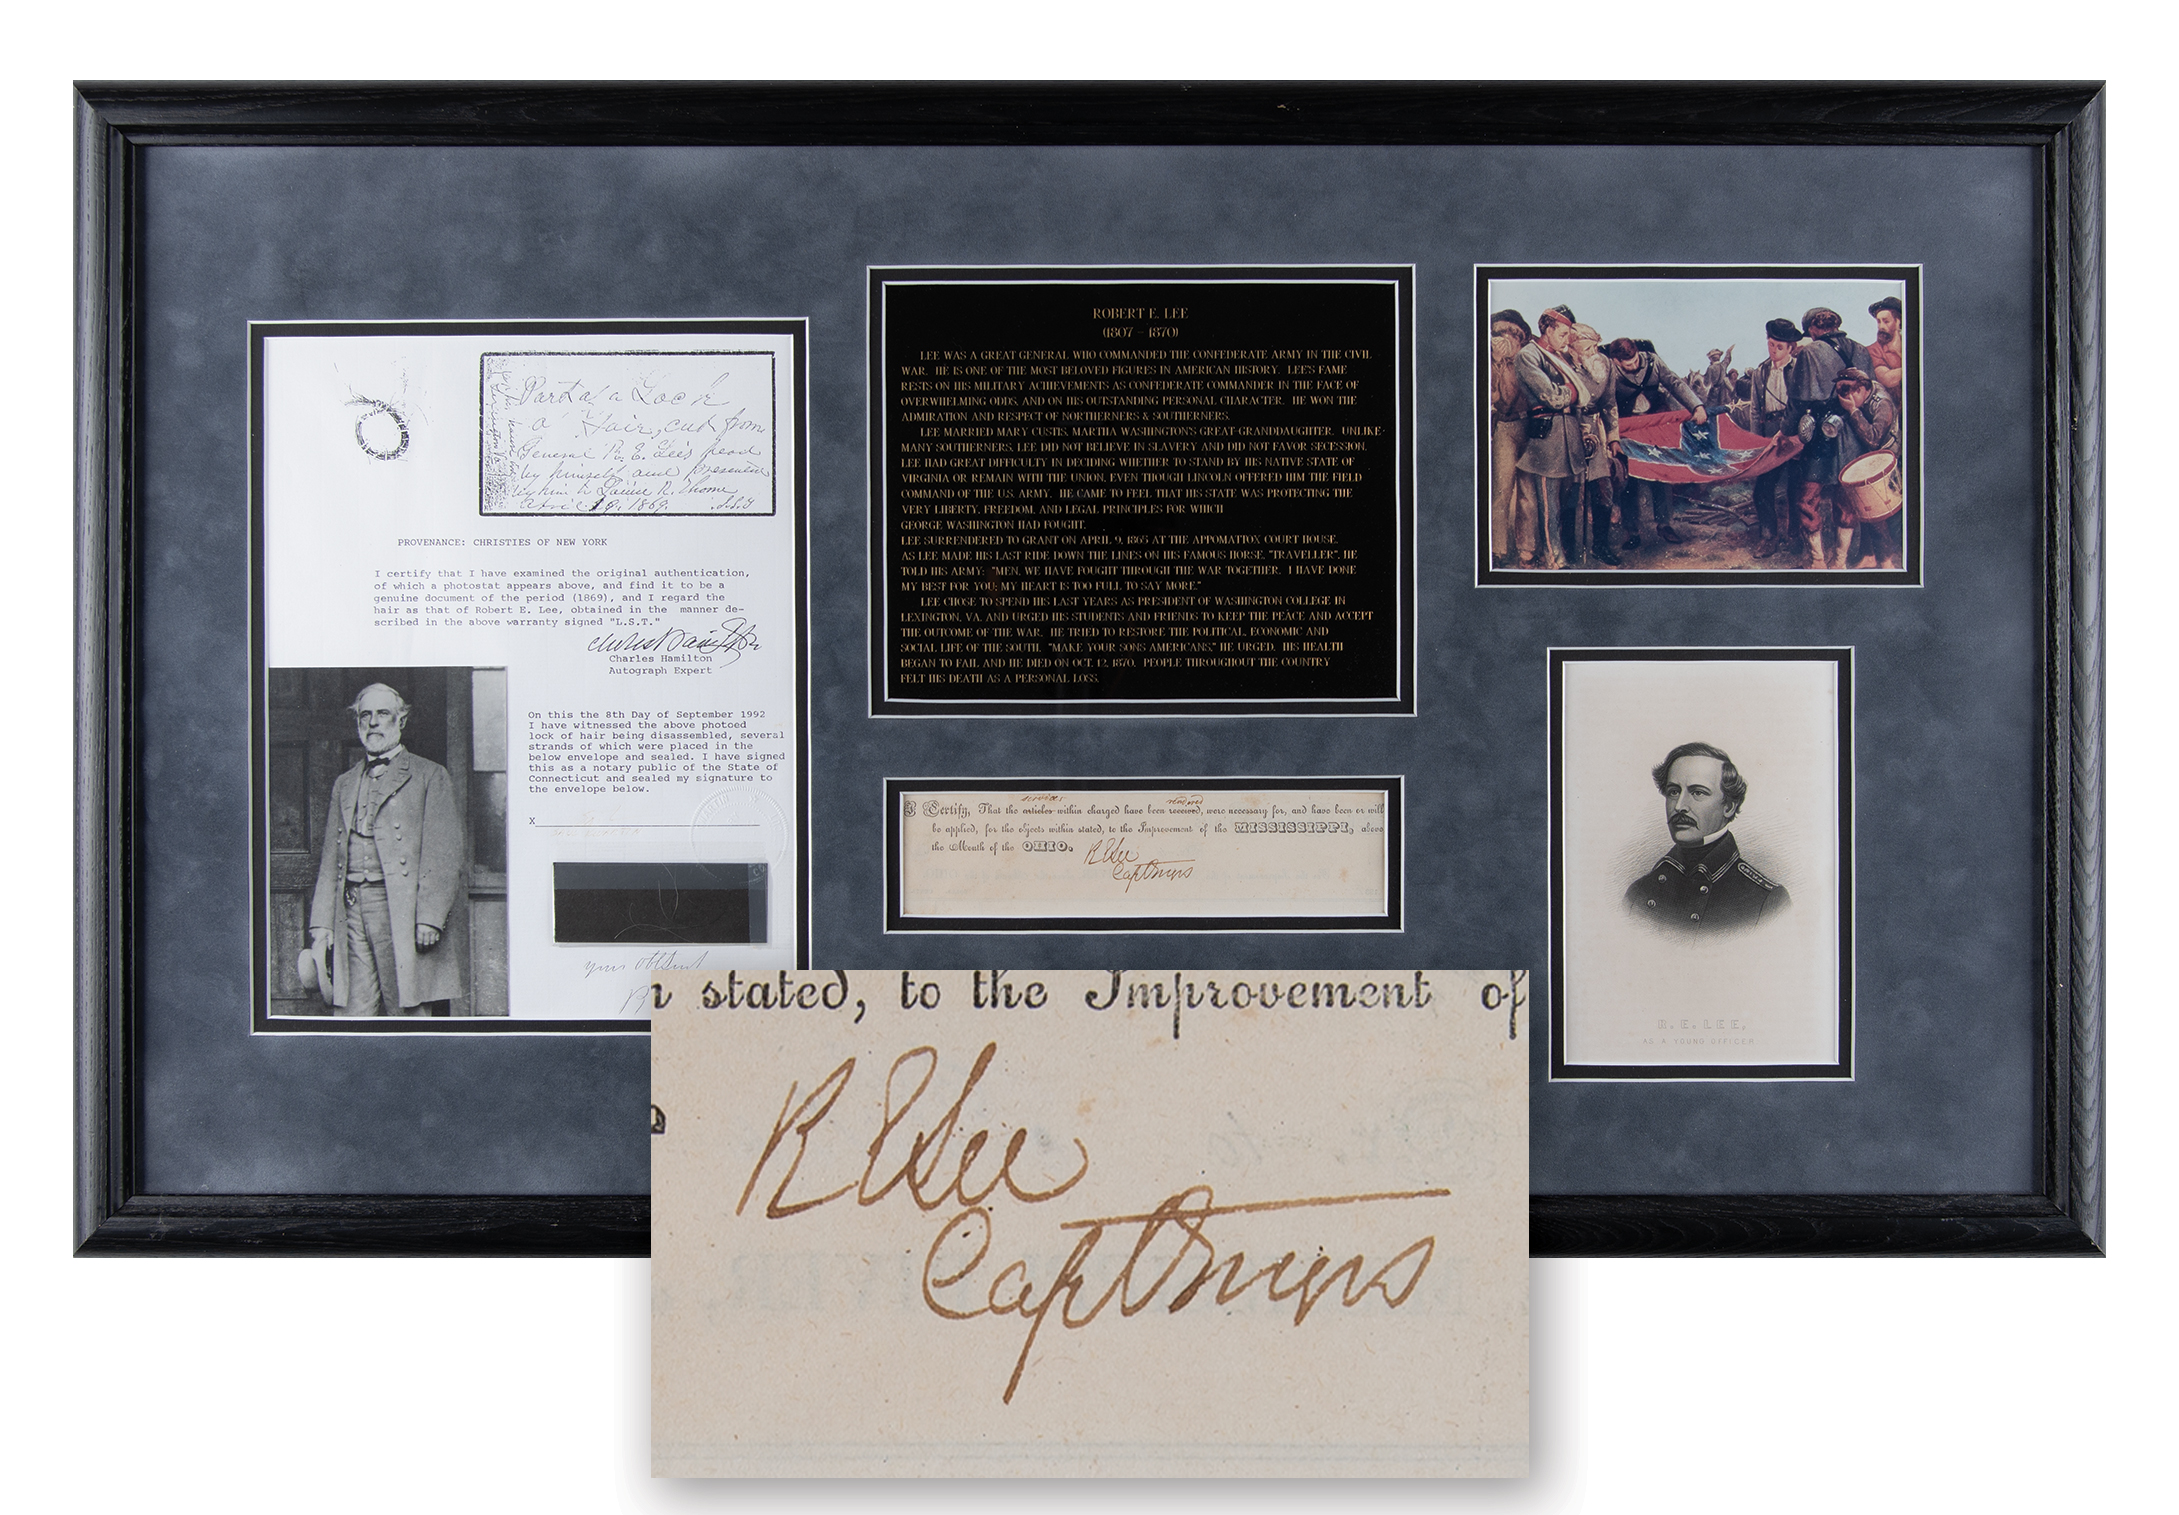 Lot #250 Robert E. Lee Document Signed and Hair Strands - Image 1